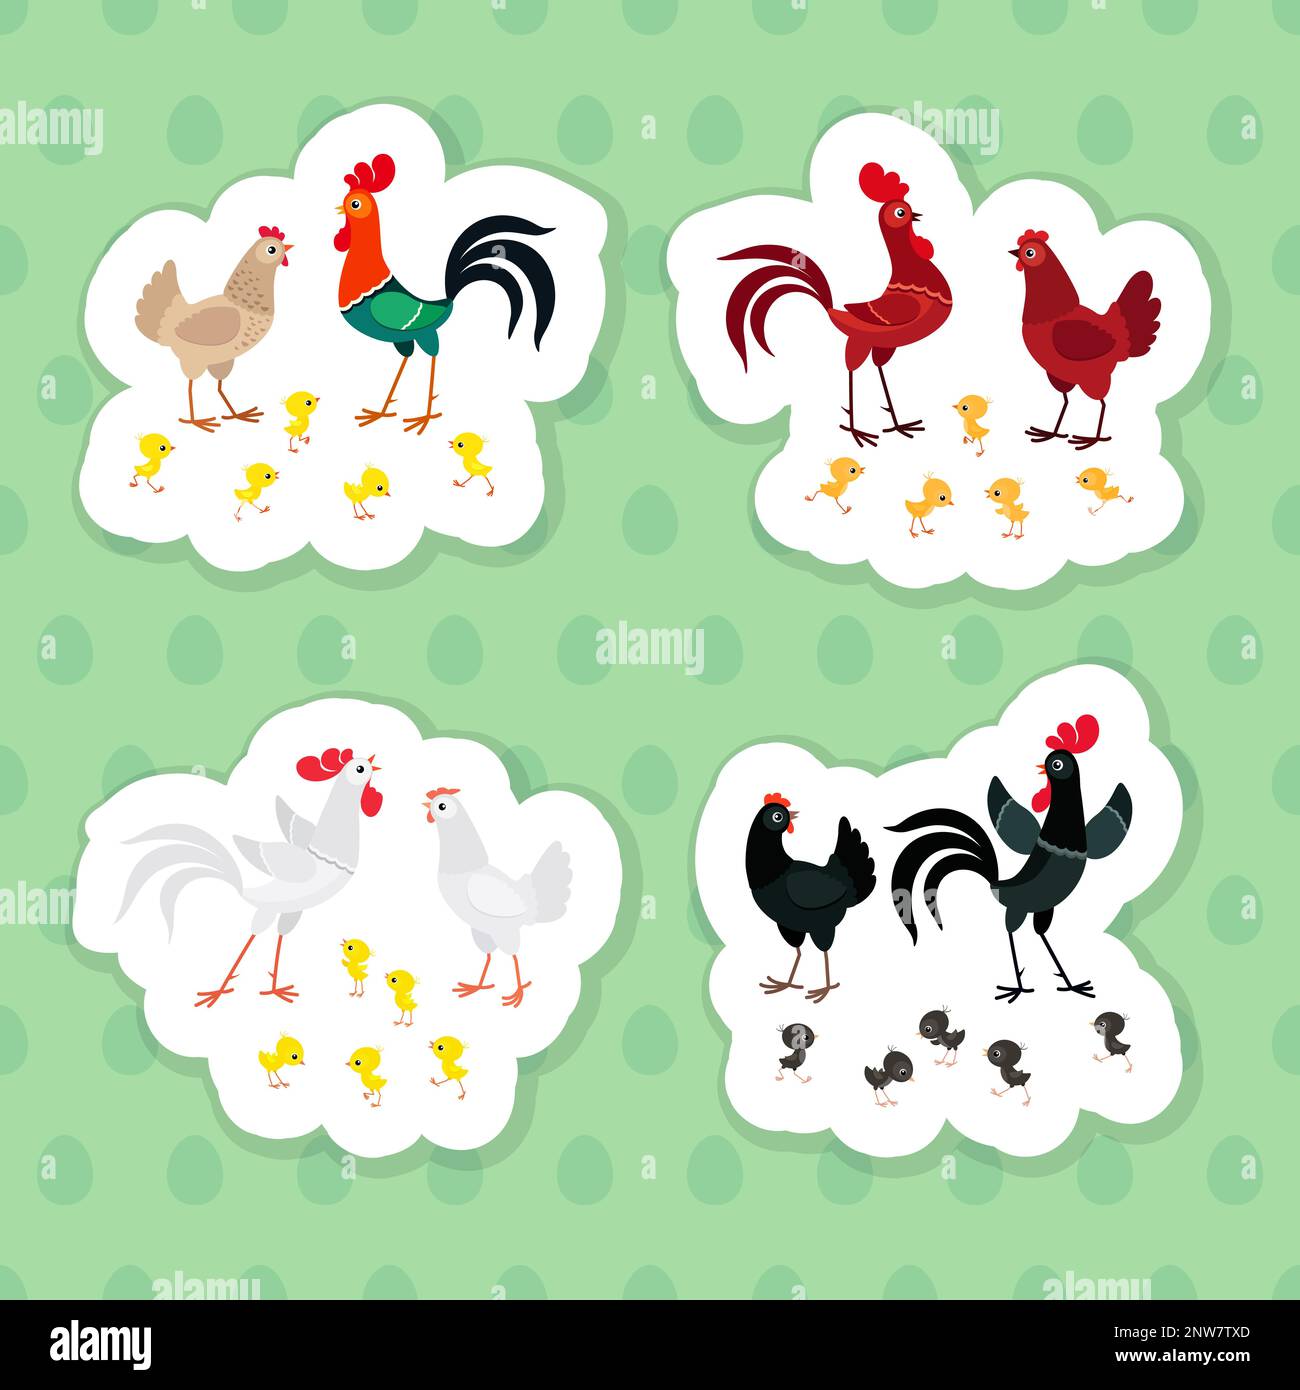 Colorful chicken families sticker pack. Vector illustration Stock Vector